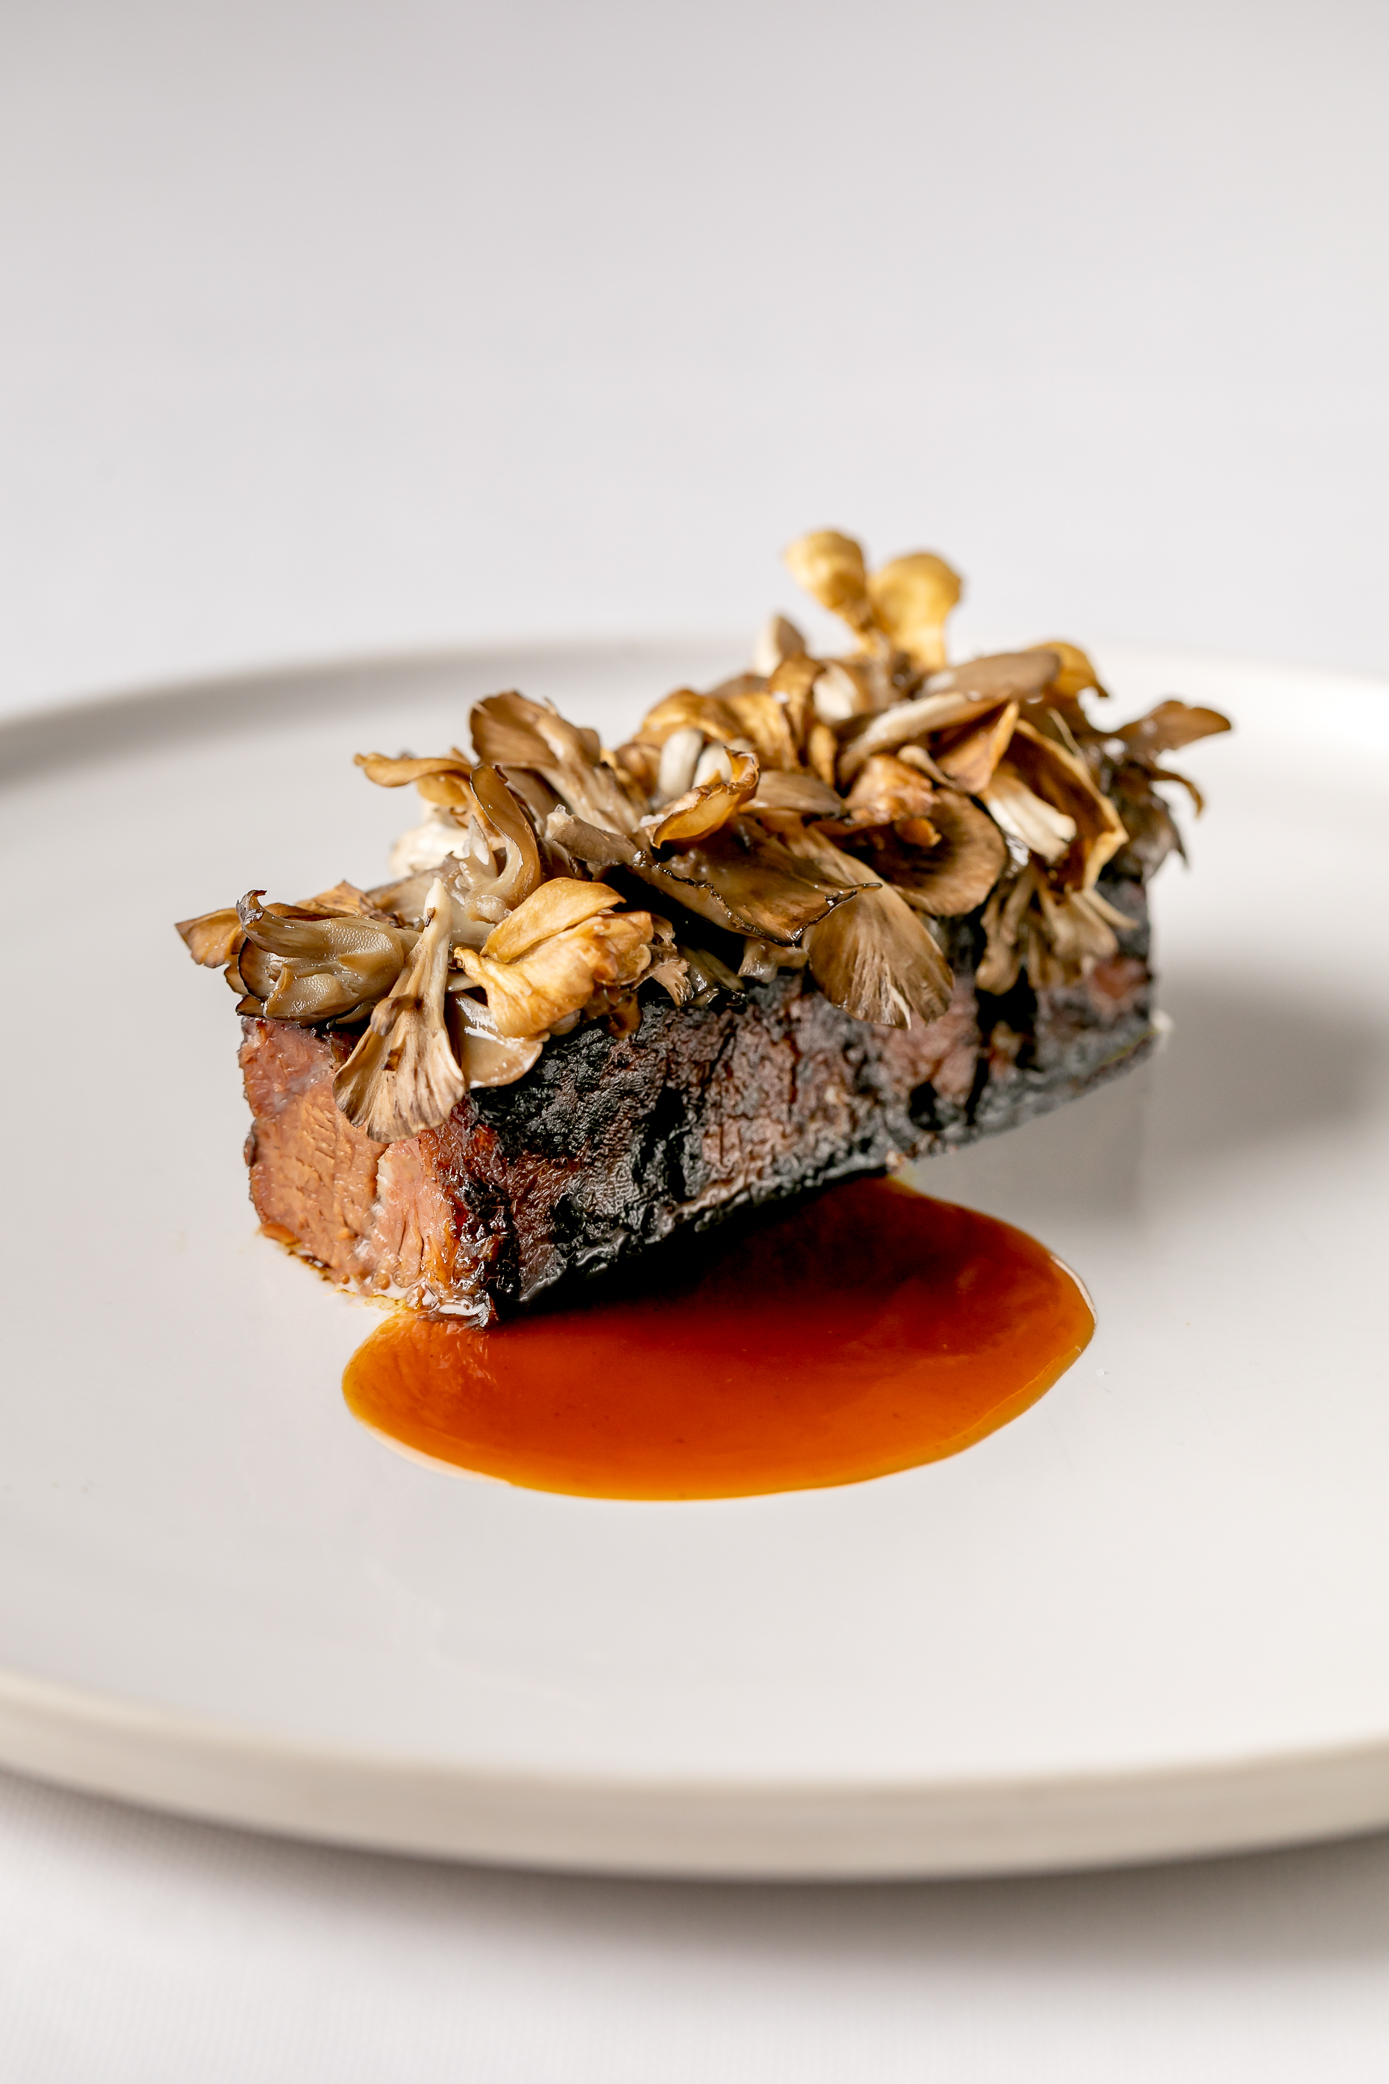 A short rib dish at Source restaurant in the Lake District